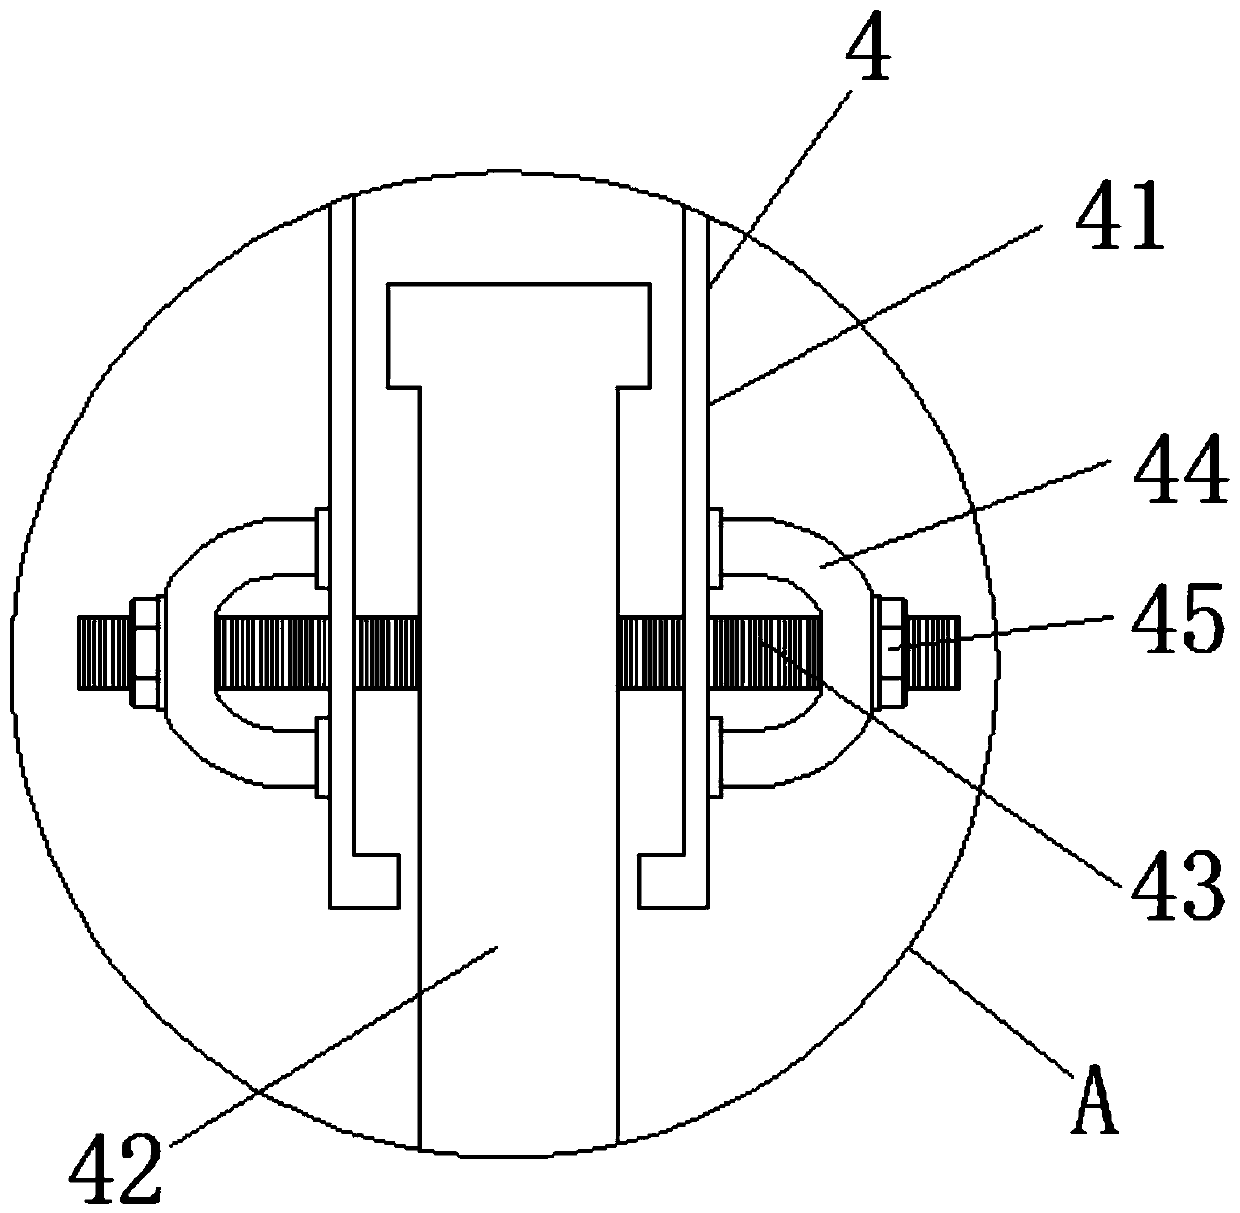 A time synchronization device with data line fastening function